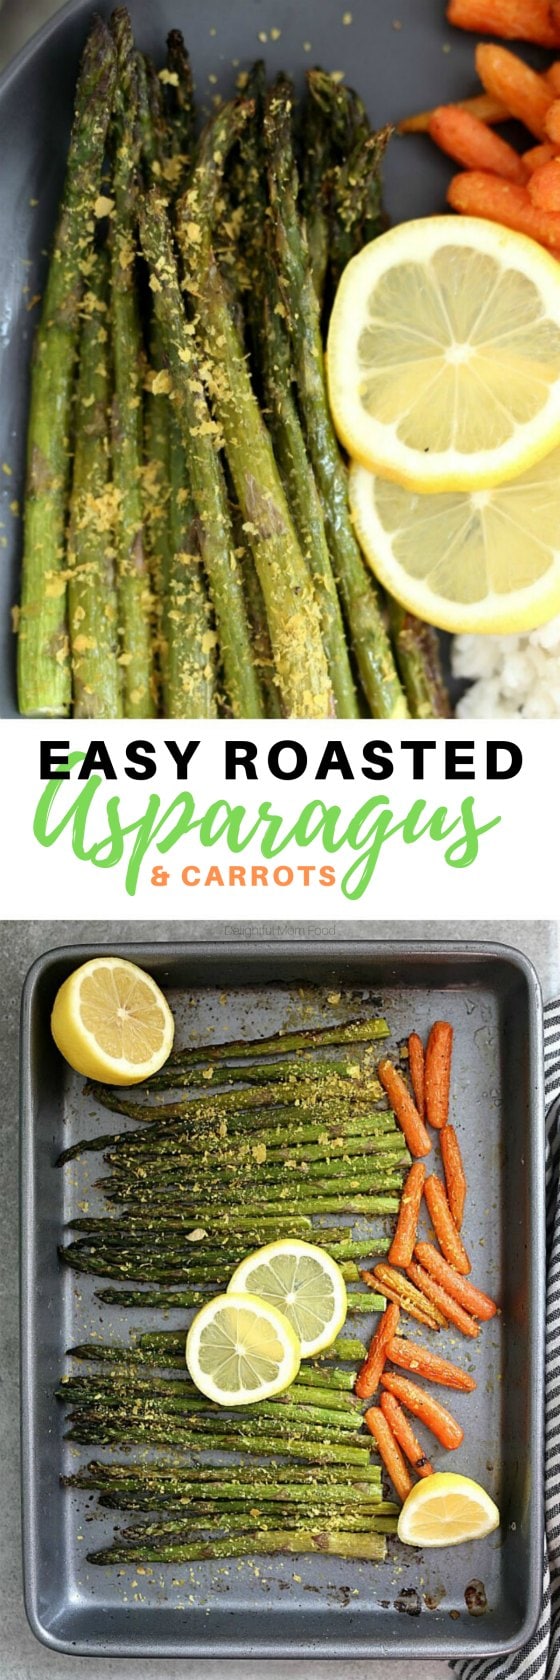 Use seasonal spring asparagus for this easy roasted asparagus and carrots recipe! It makes an excellent side dish in as little as 20 minutes - hands-free! #roastedvegetables #roastedasparagusandcarrots #asparagus #carrots #recipe #glutenfree #healthy #sidedish #easysidedish #vegan | Recipe at Delightful Mom Food